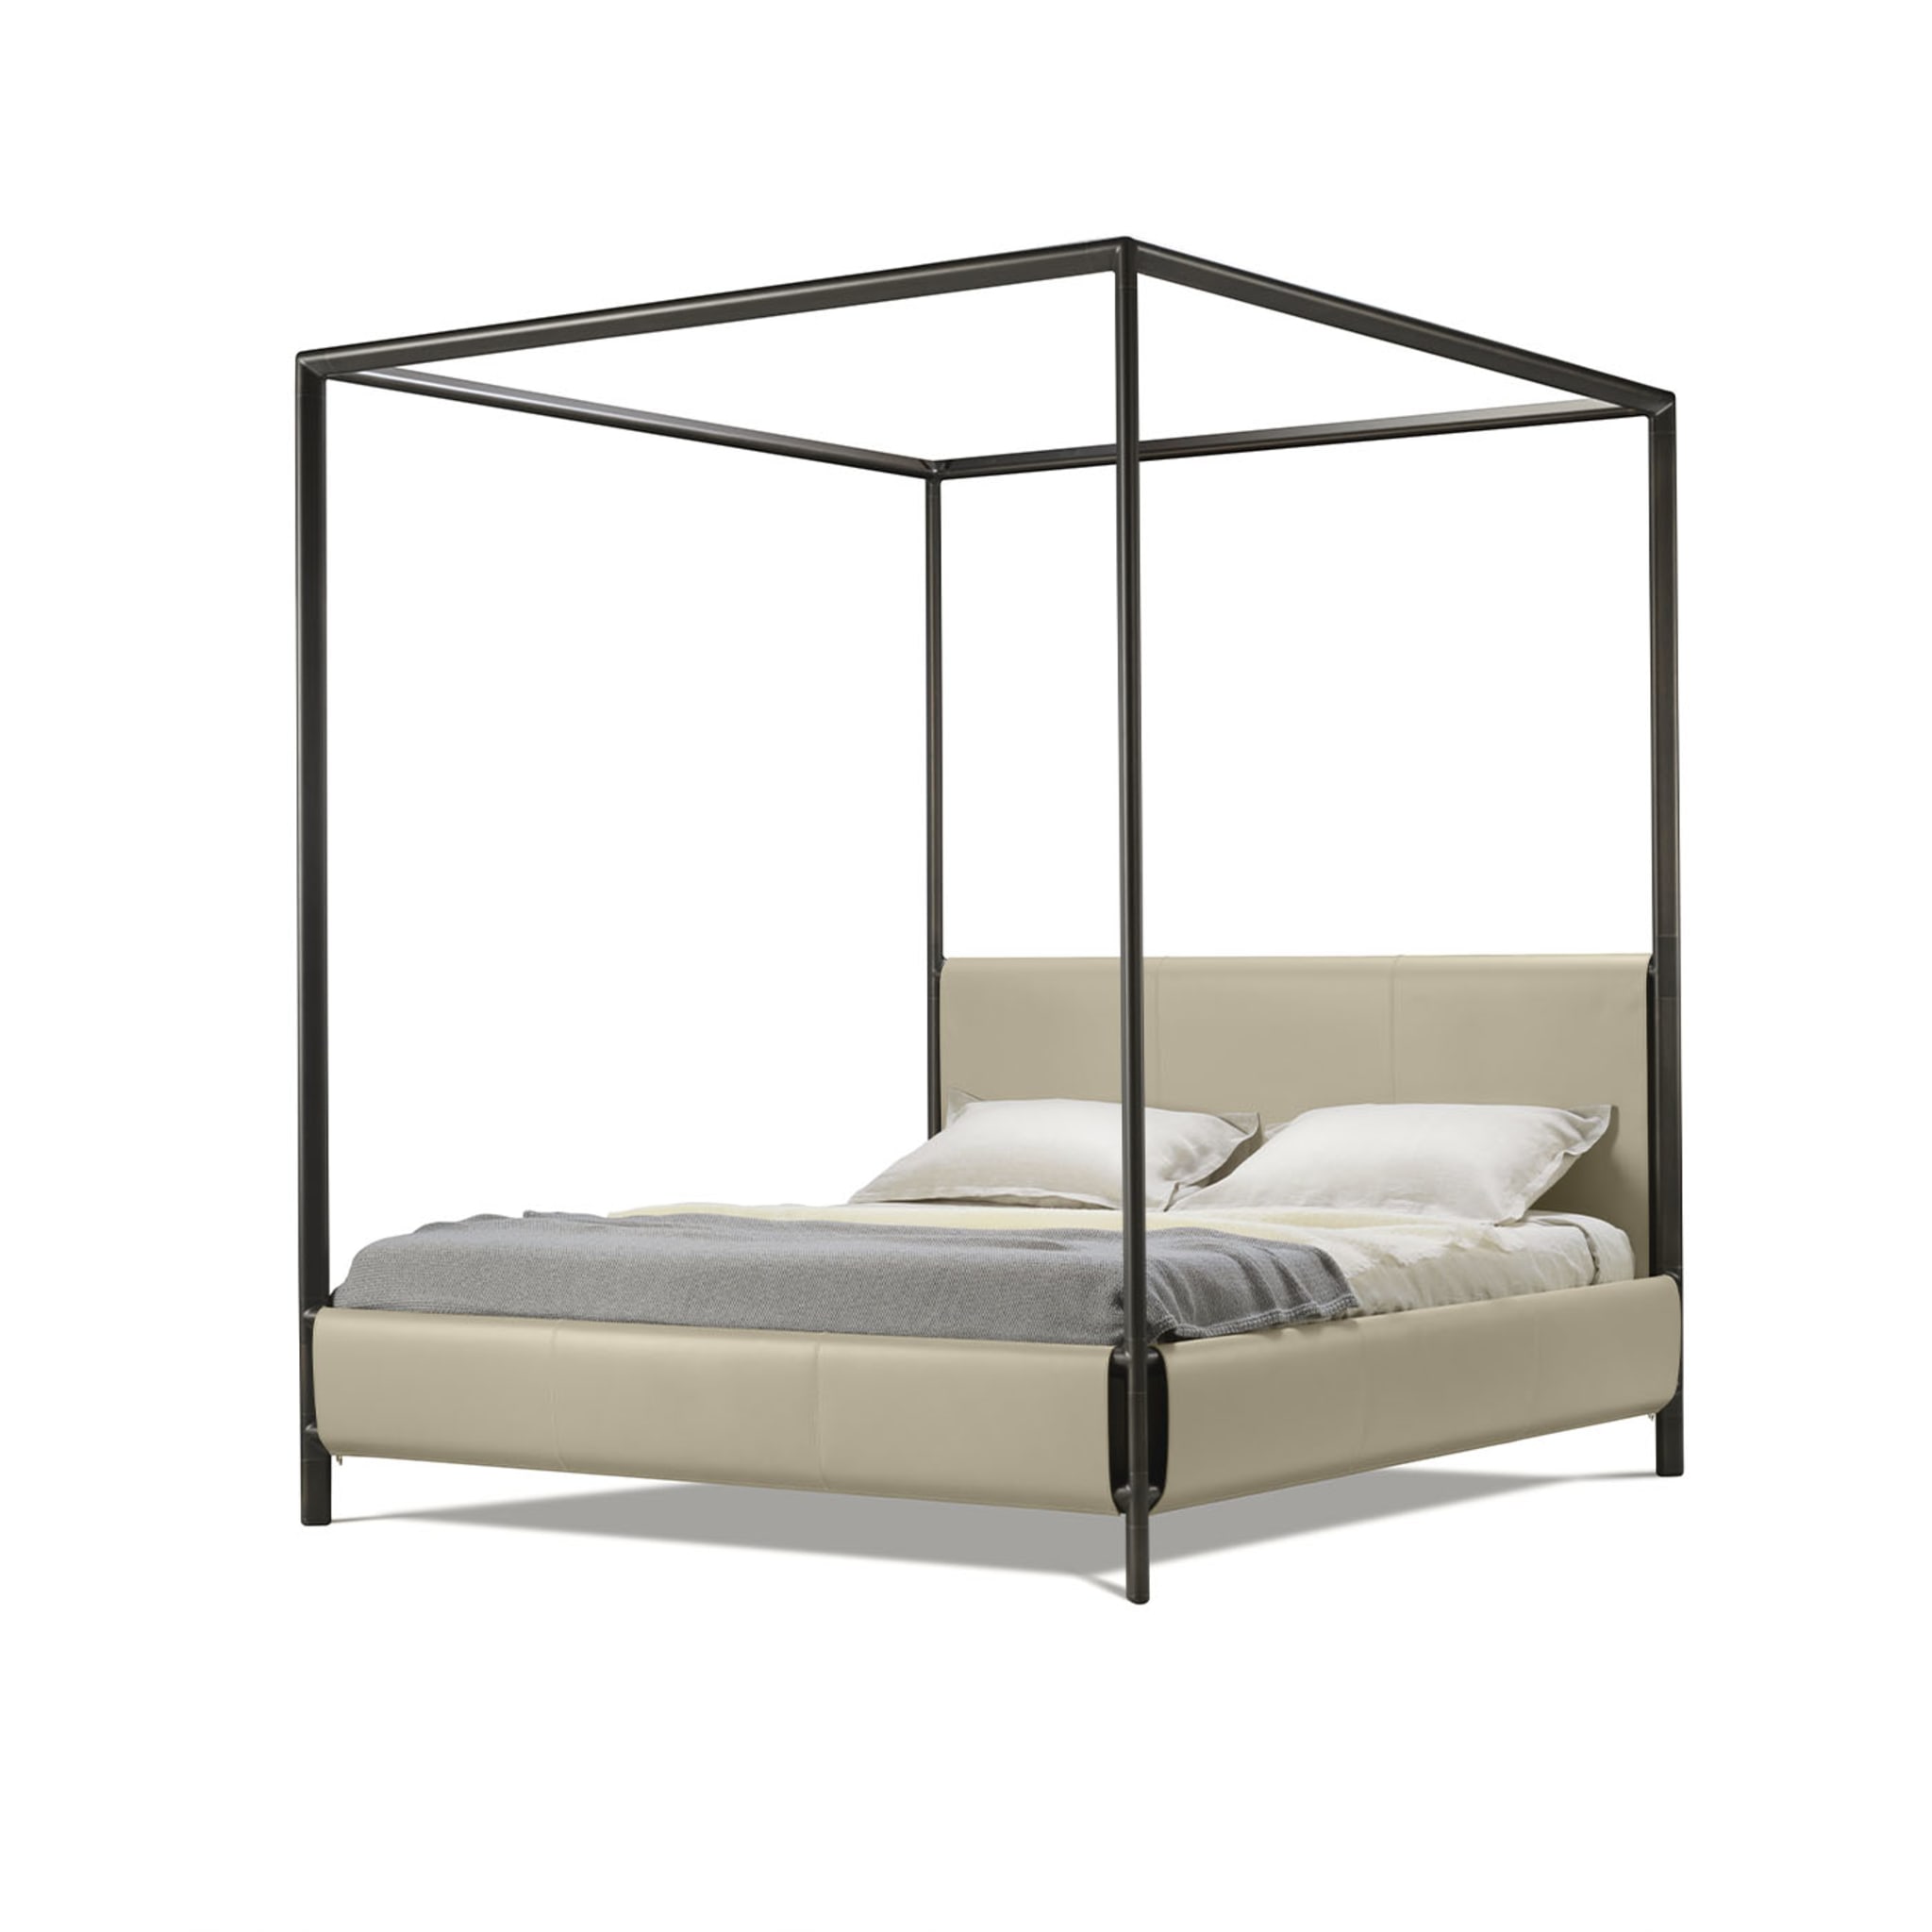 Frame Canopy Bed by Stefano Giovannoni - Alternative view 1